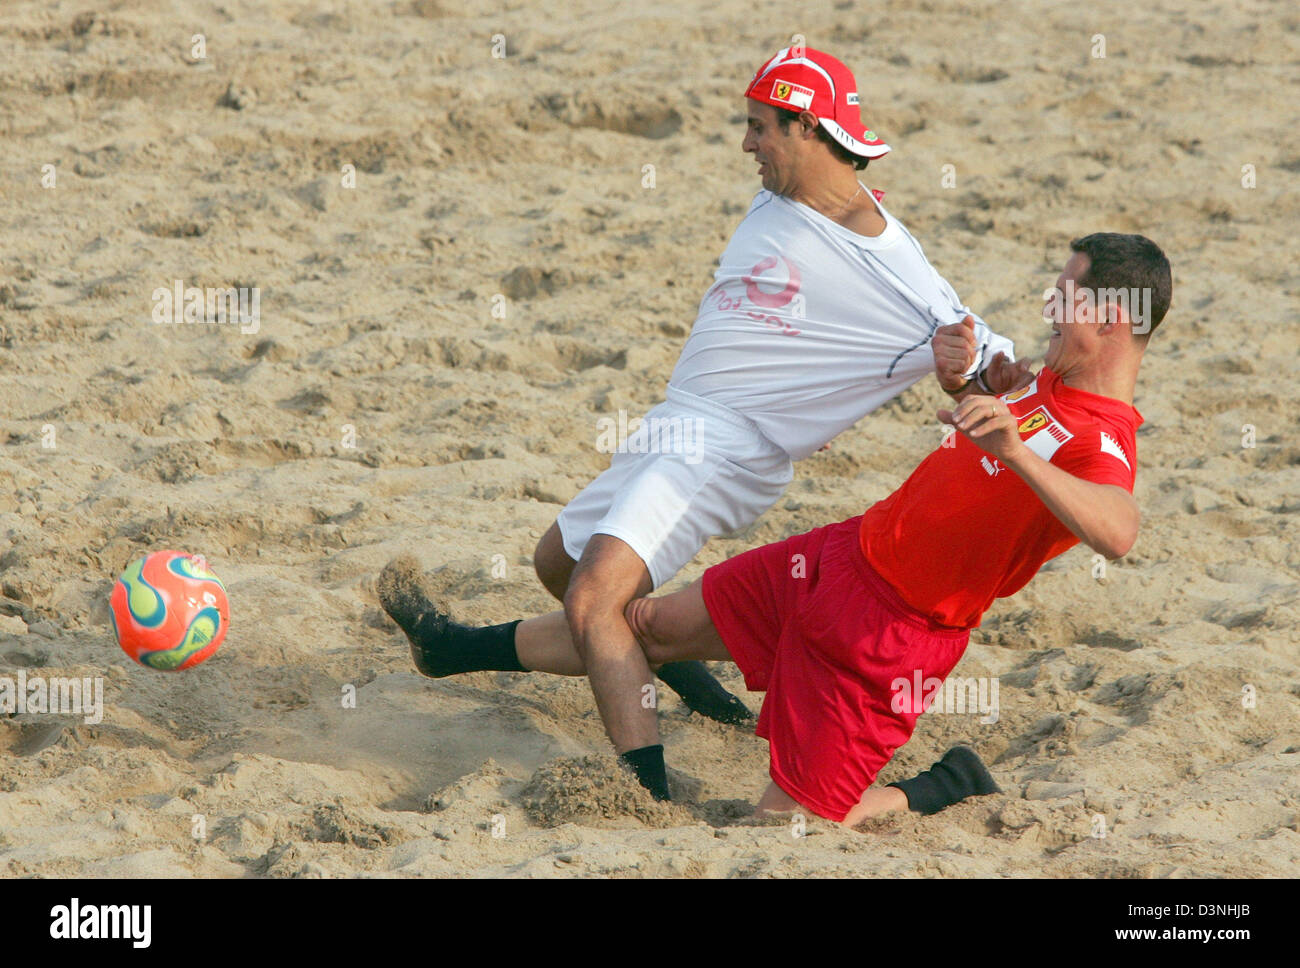 German Formula One driver Michael Schumacher (R) of Scuderia Ferrari F1 team and his Brazilian team mate Felipe Massa challange each other during a beach soccer match at the race track Circuit de Catalunya in Montmelo near Barcelona, Spain, Thursday 11 May 2006. The Grand Prix of Spain takes place on Sunday. Photo: Gero Breloer Stock Photo